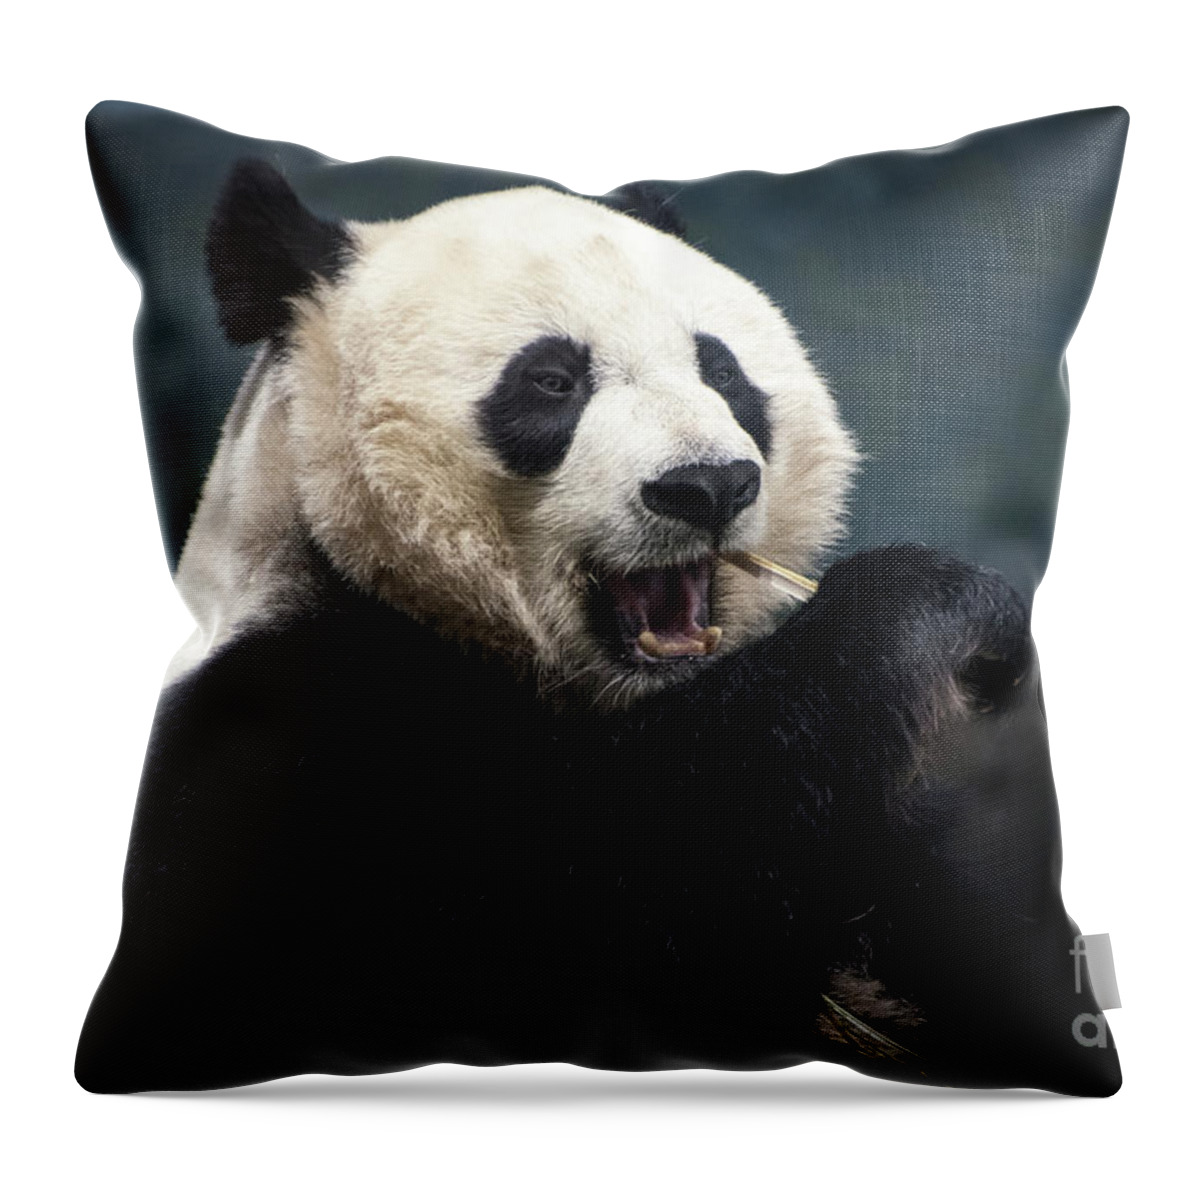 Washington Throw Pillow featuring the photograph Hungry Panda by Judy Wolinsky